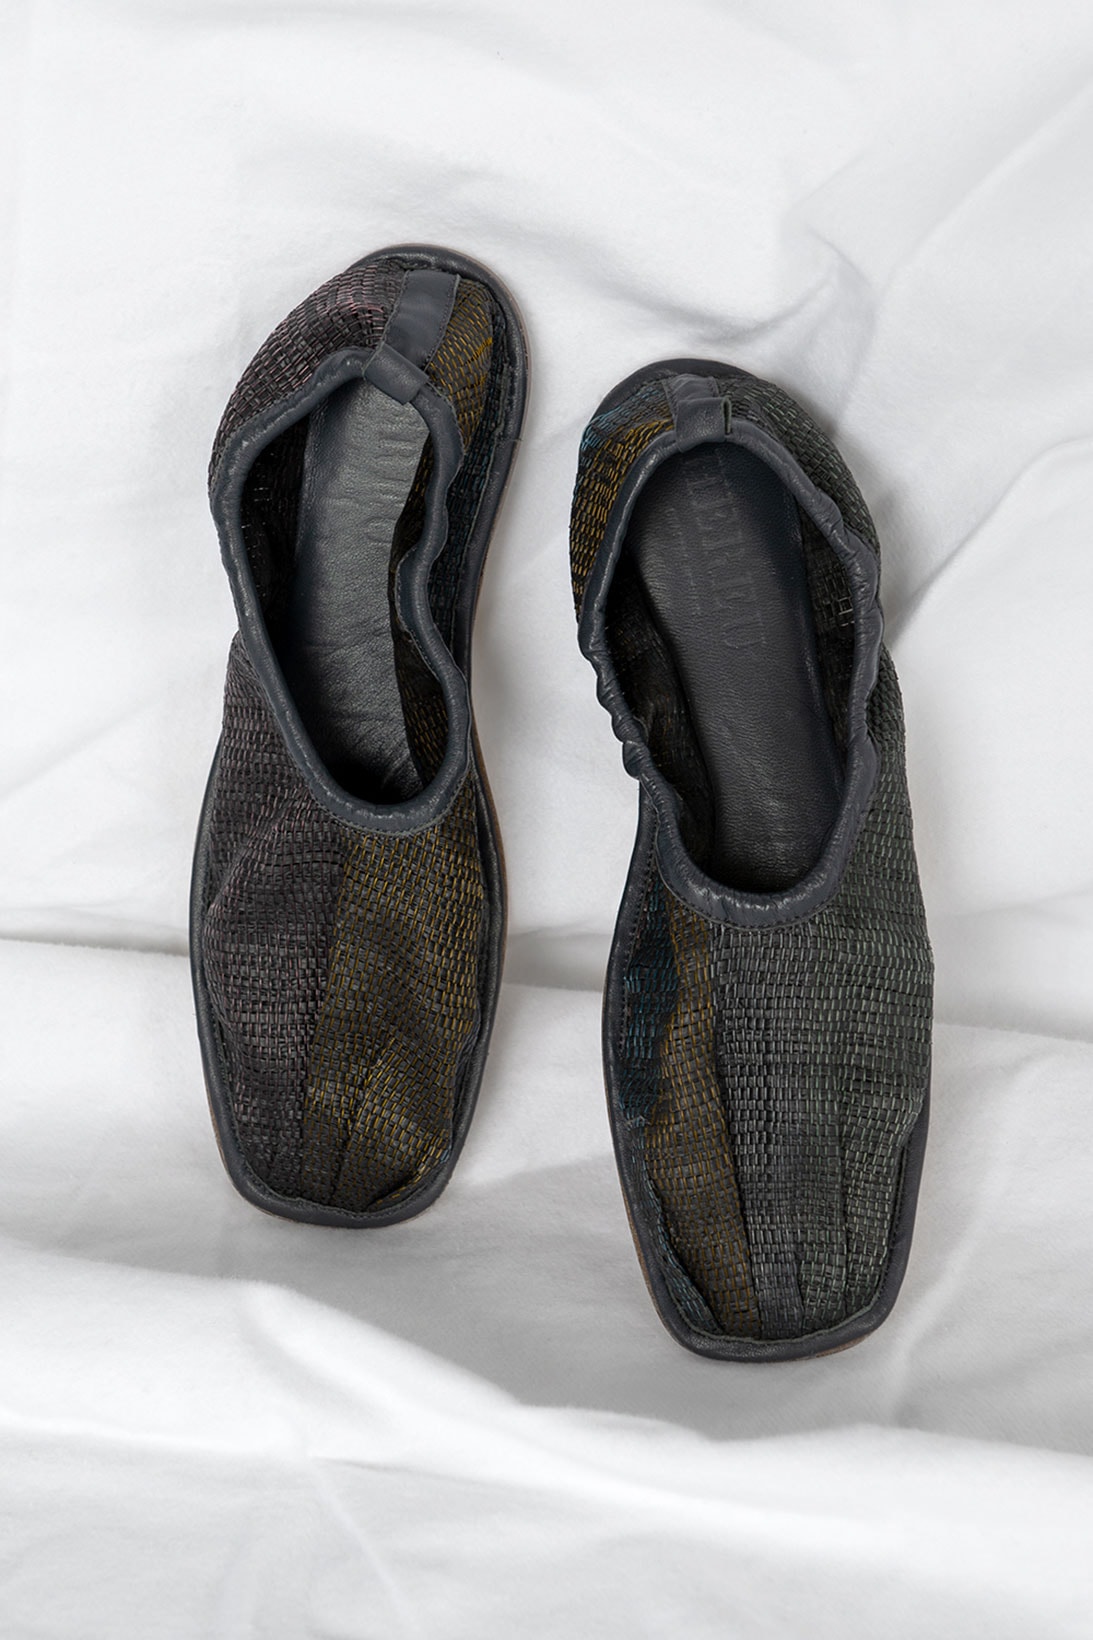 cecilie bahnsen hereu hyacinth flats shoes collaboration sustainable footwear black